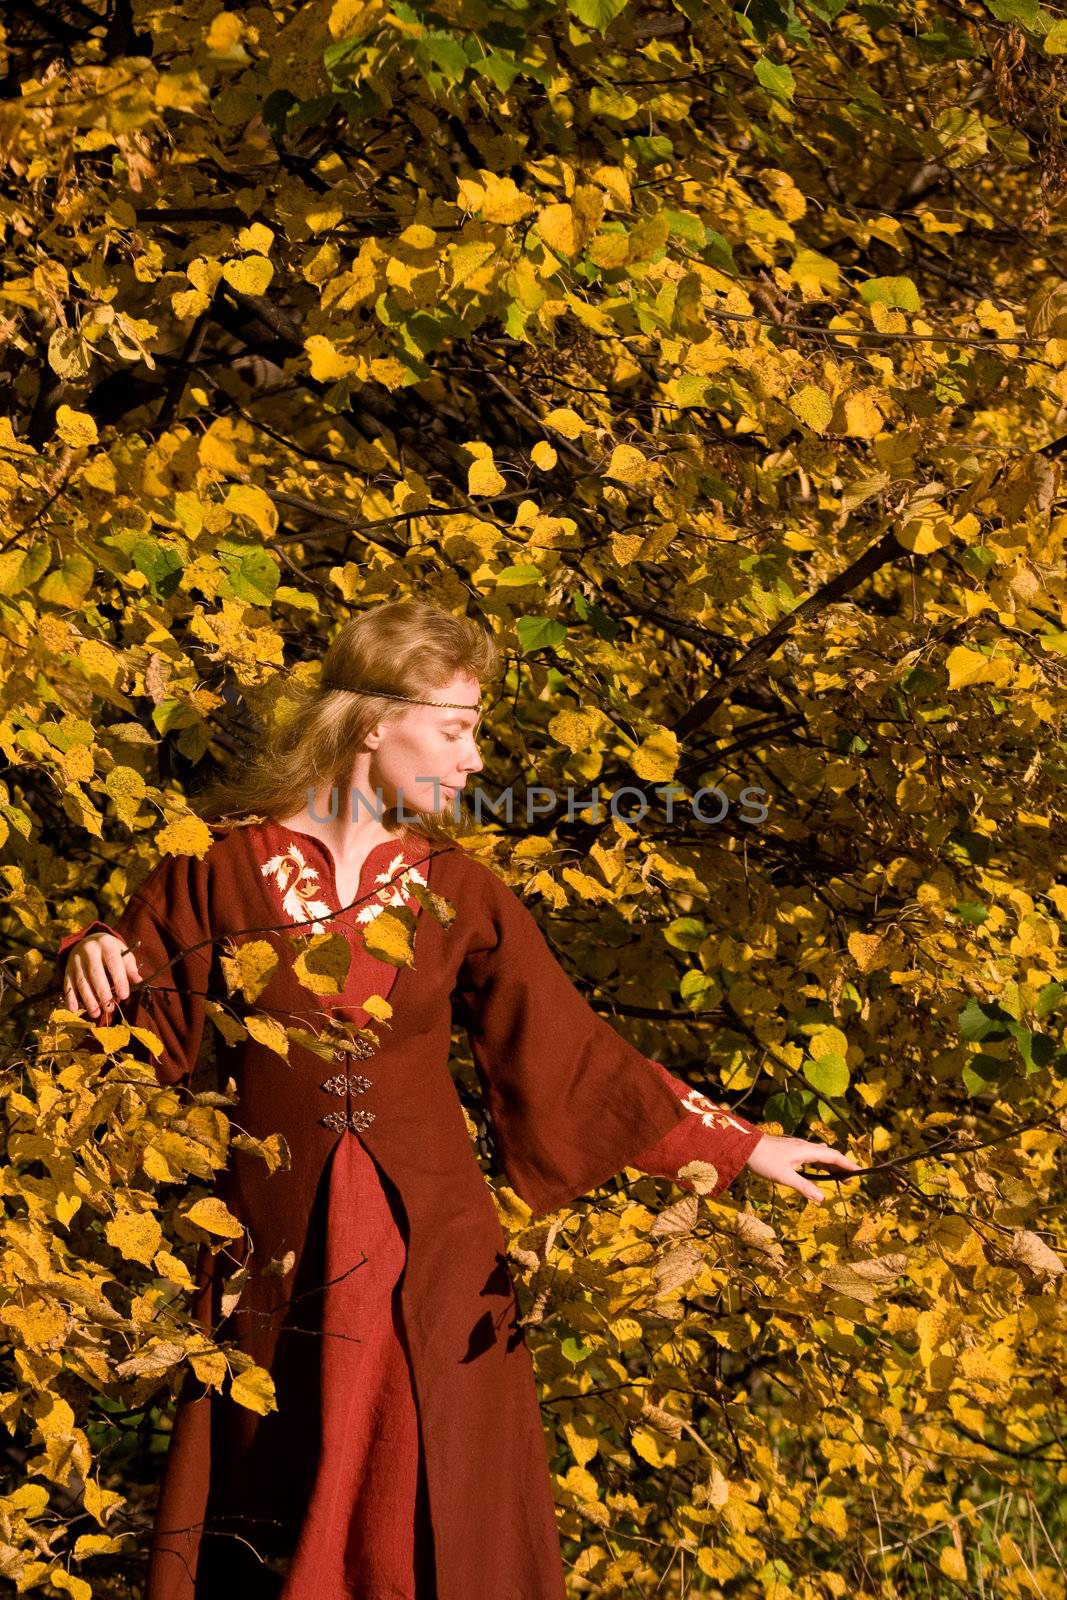 The blonde girl in medieval red dress in the autumn forest
